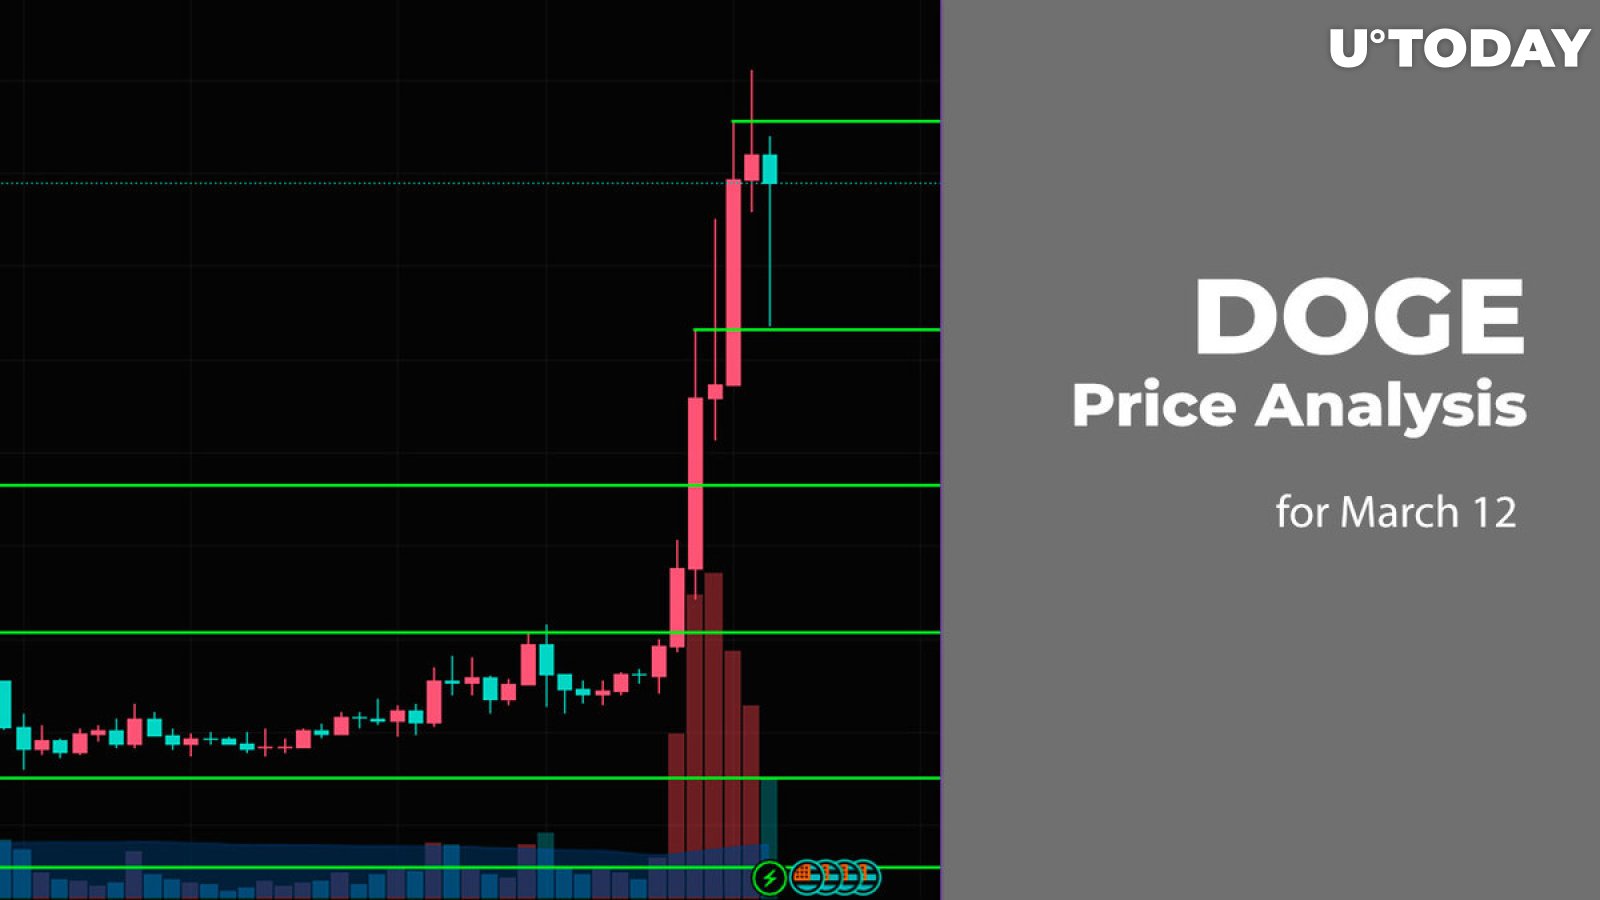 DOGE Price Prediction for March 12